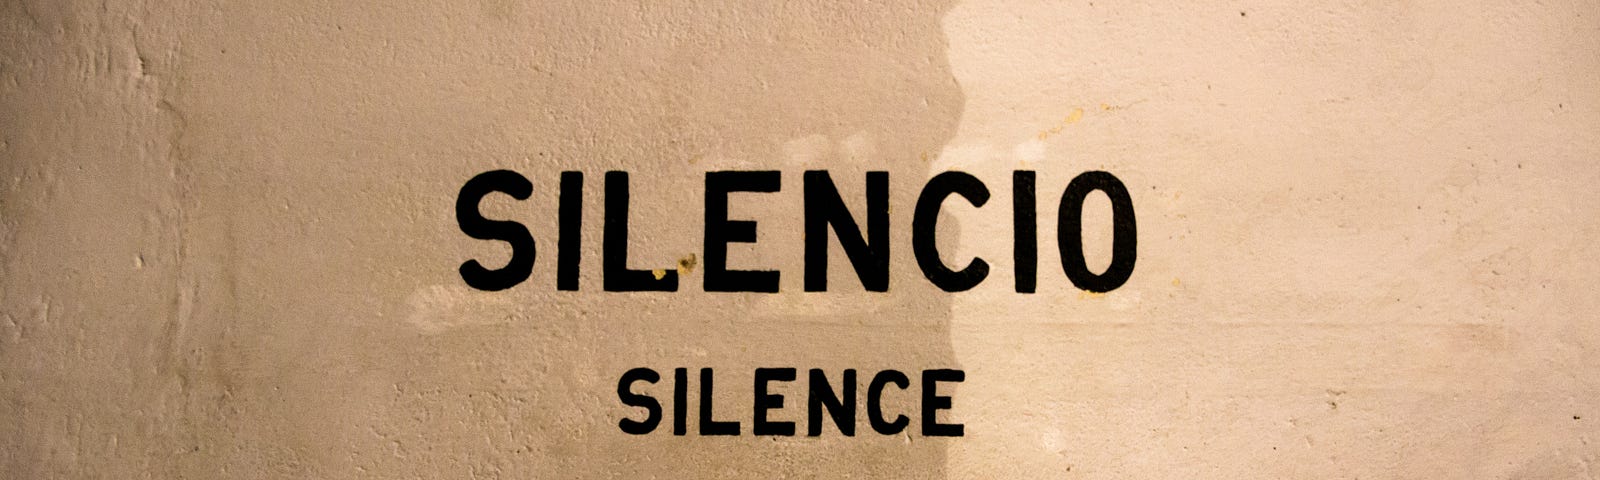 Picture of a sign reading “Silence” via Alt text on Medium